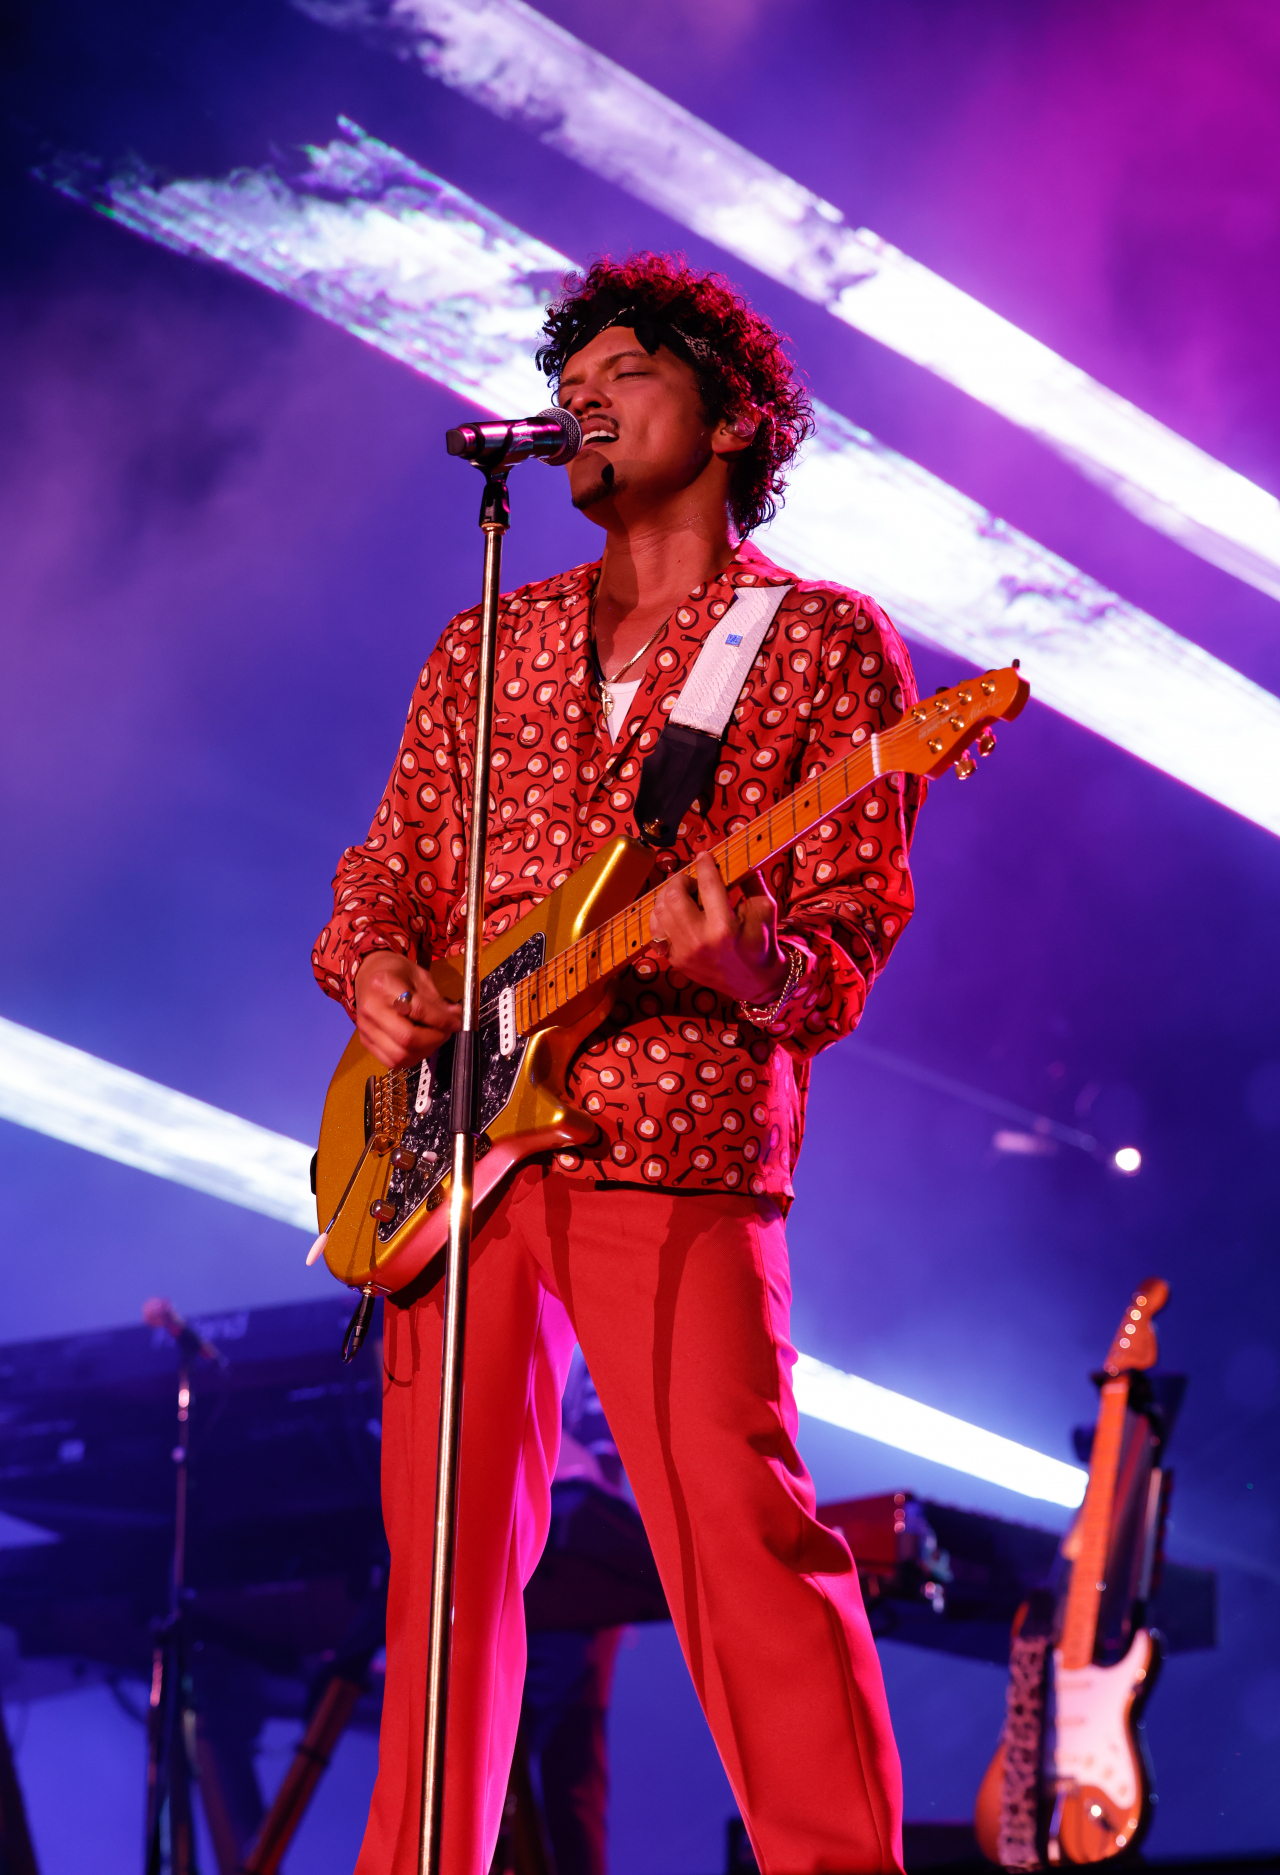 US singer-songwriter Bruno Mars performs during the ″Hyundai Card Super Concert 27 Bruno Mars″ concert held on Saturday and Sunday at the Jamsil Olympic Main Stadium, southern Seoul. (Hyundai Card)